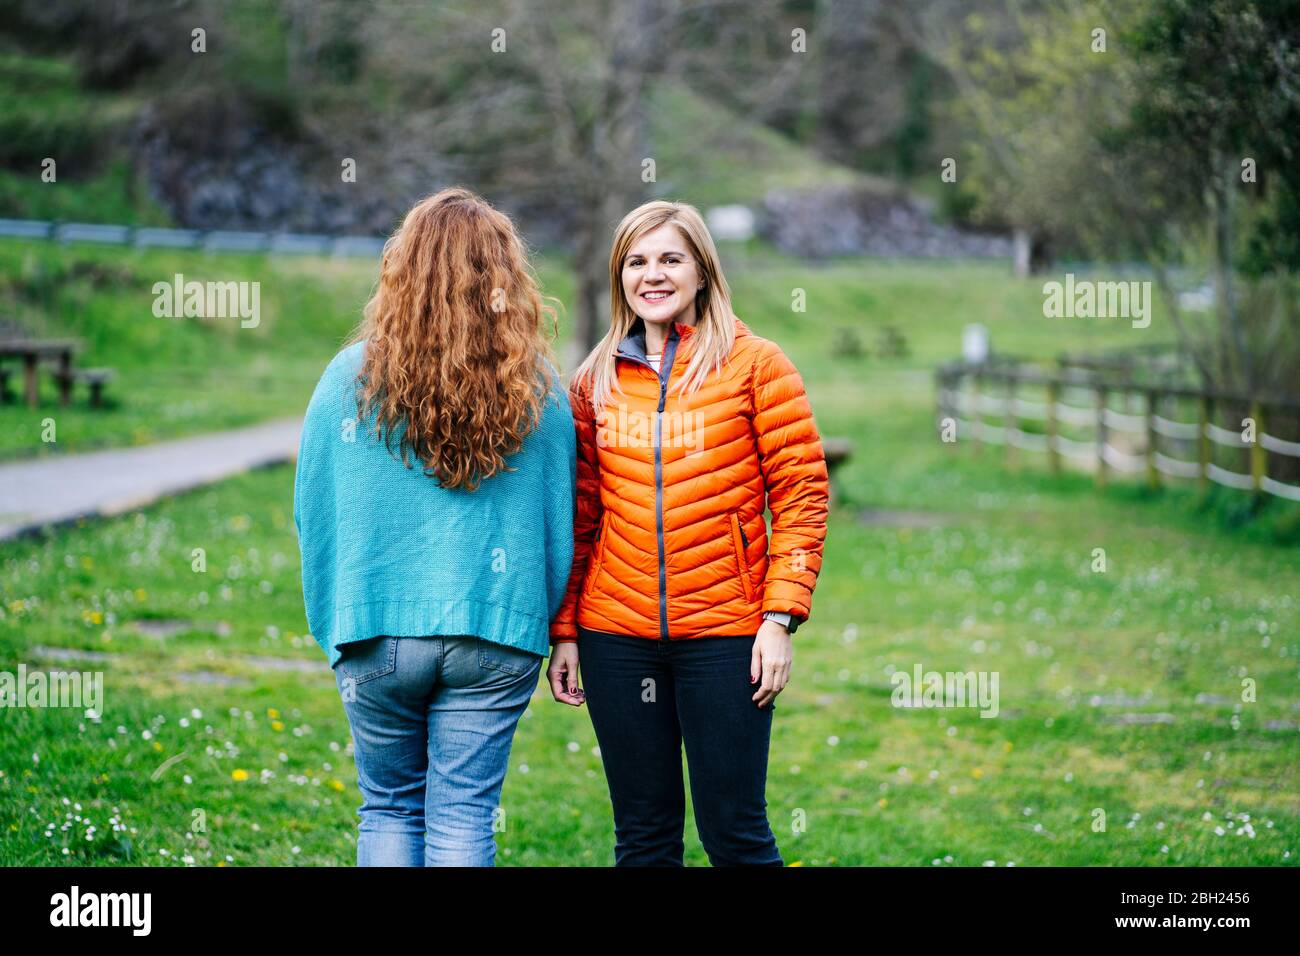 Portrait of happy woman standing side by side with her friend Stock Photo